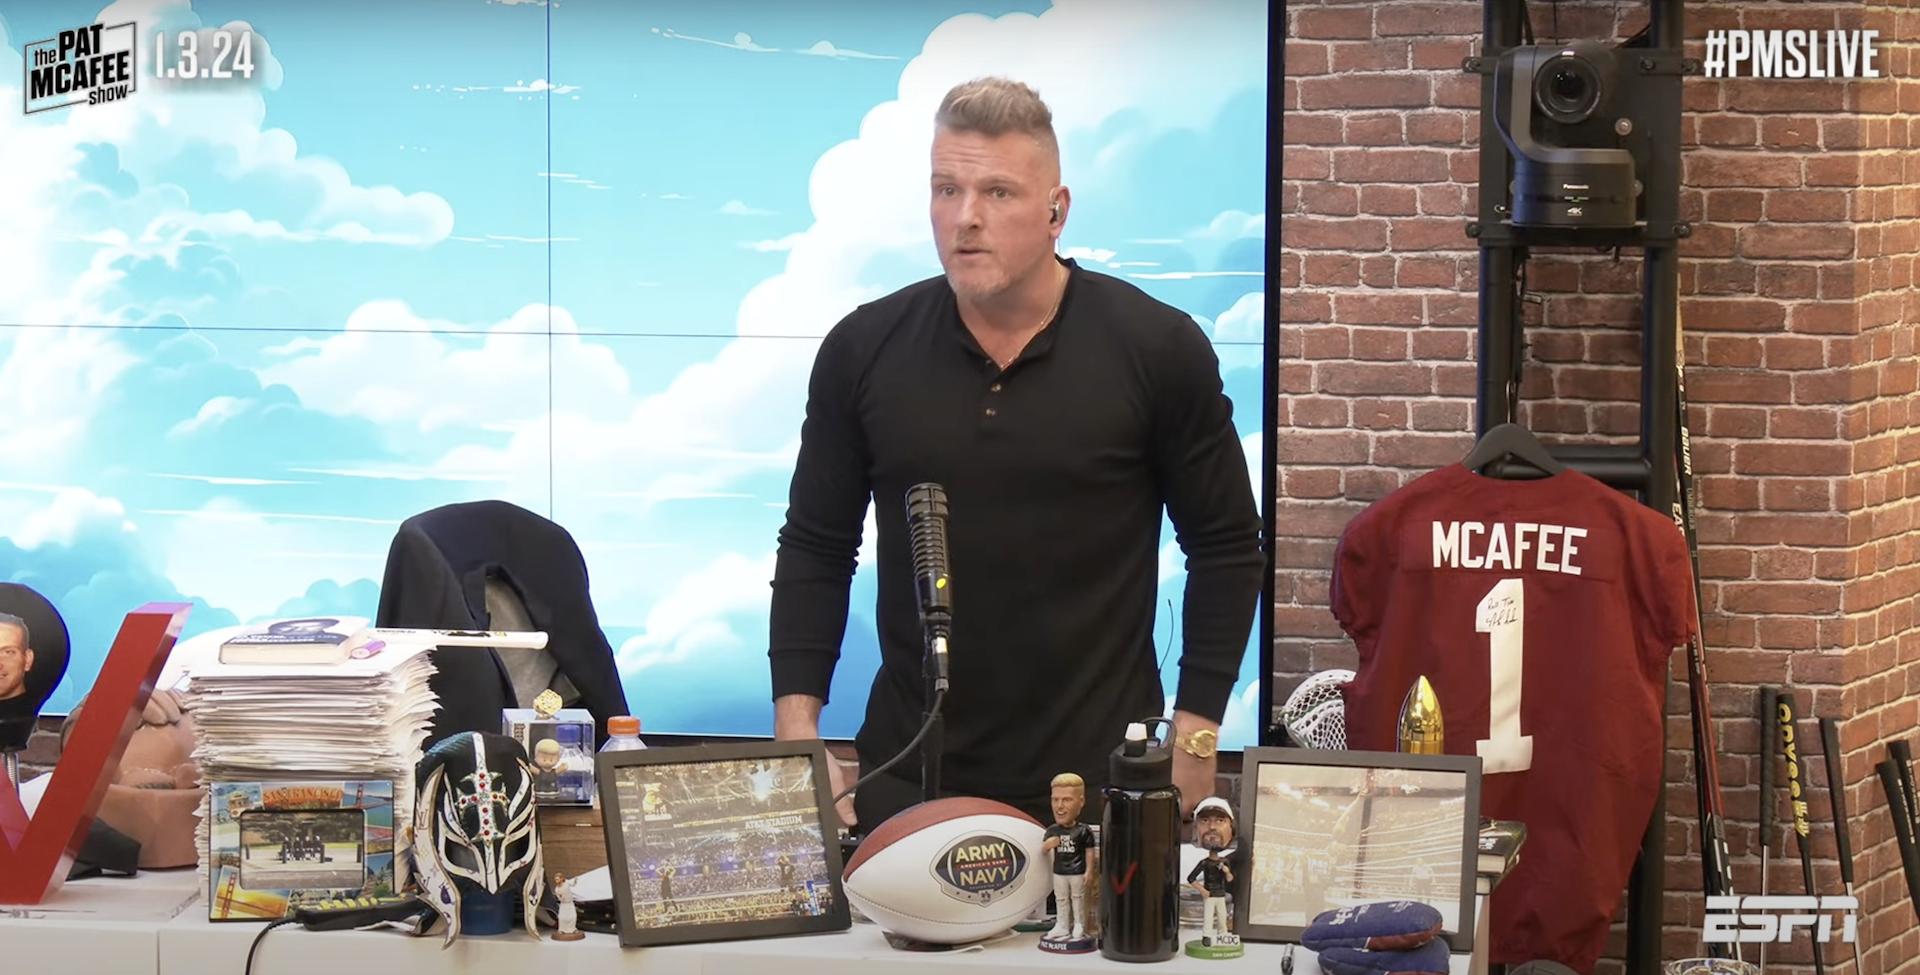 Pat McAfee on the set of his tv show